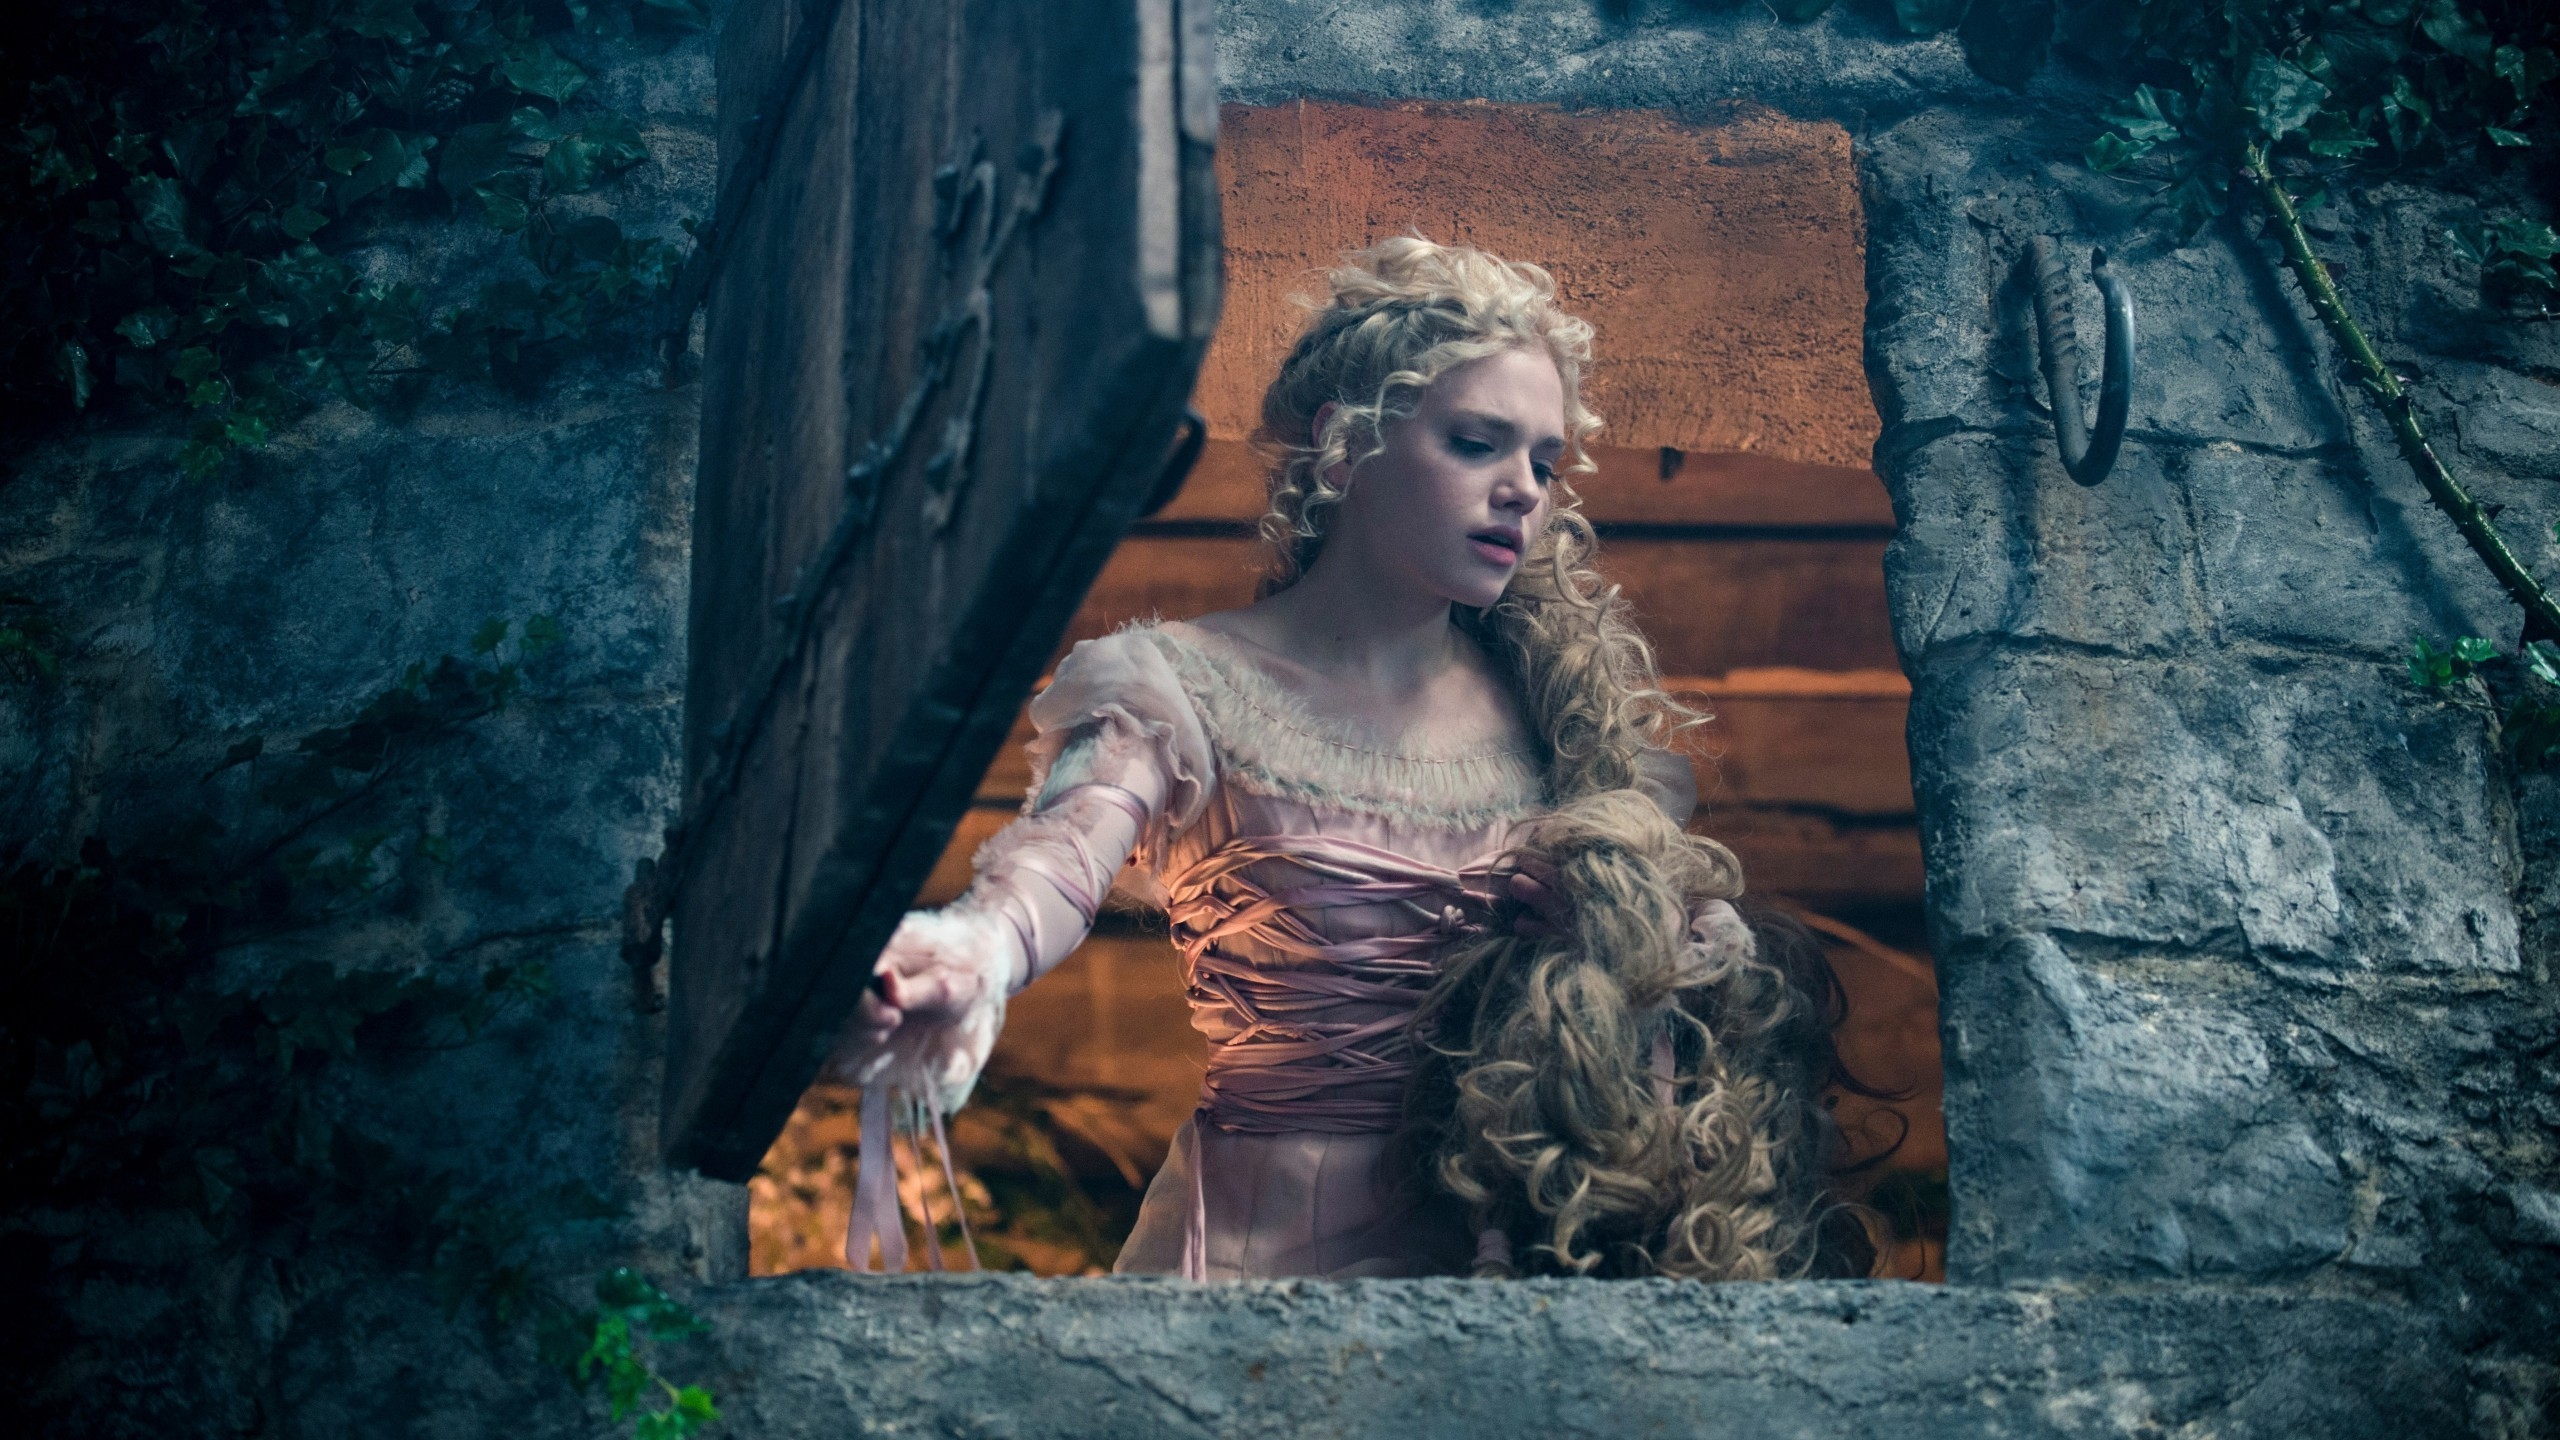 Into the Woods Rapunzel for 2560x1440 HDTV resolution